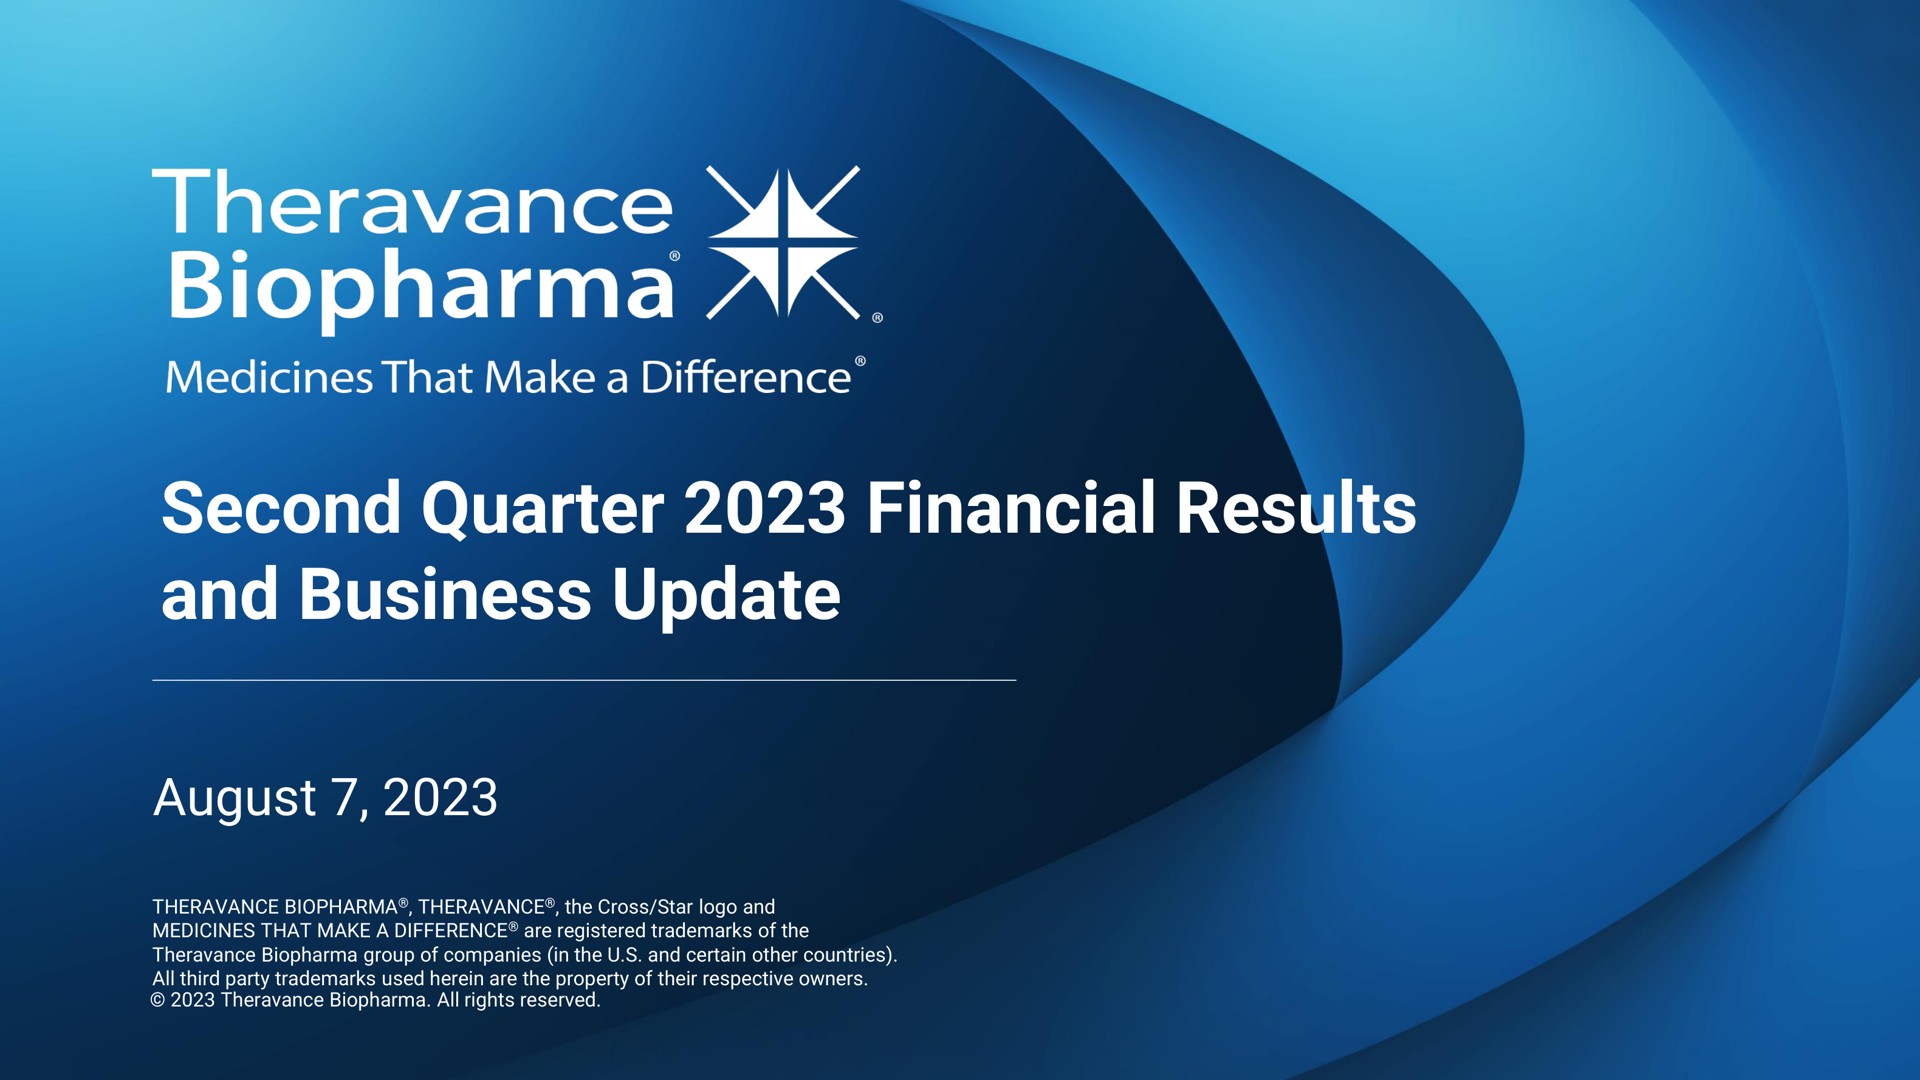 second quarter financial results and business update | Theravance Biopharma